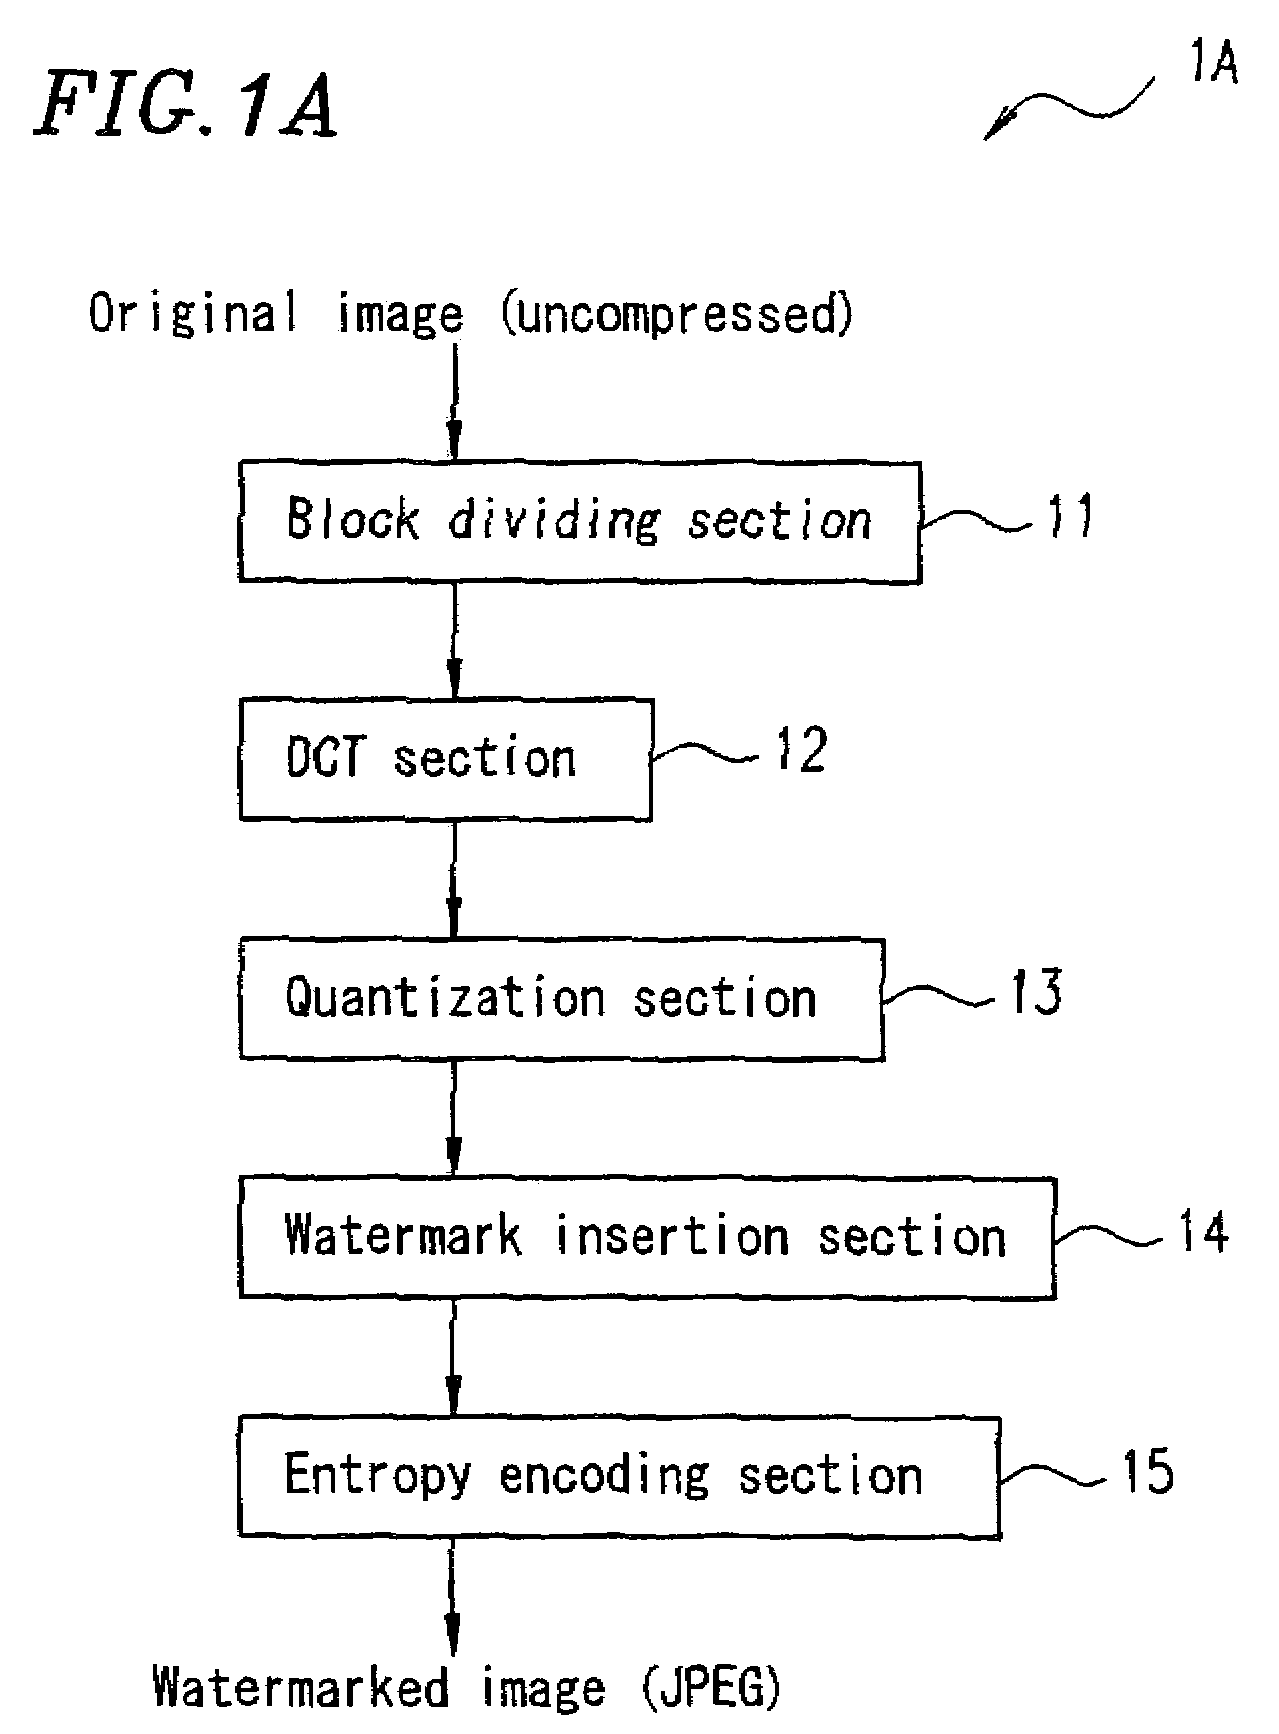 Image processing apparatus, image processing system, electronic information apparatus, image processing method, control program, and computer-readable recording medium